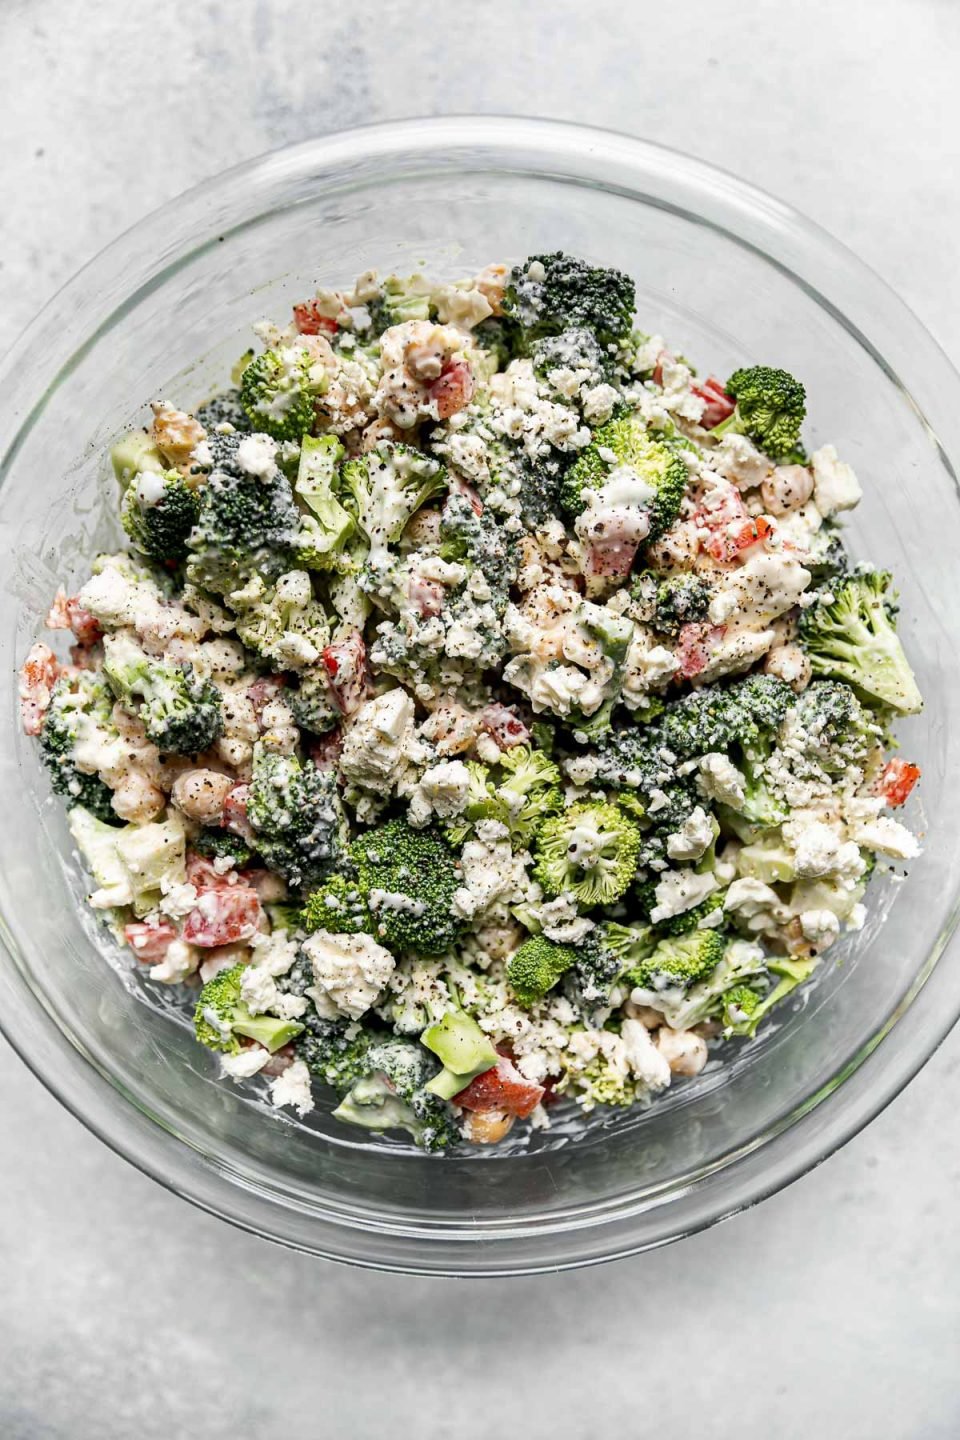 Dressed healthy broccoli salad shown in a large glass mixing bowl atop a light gray surface.